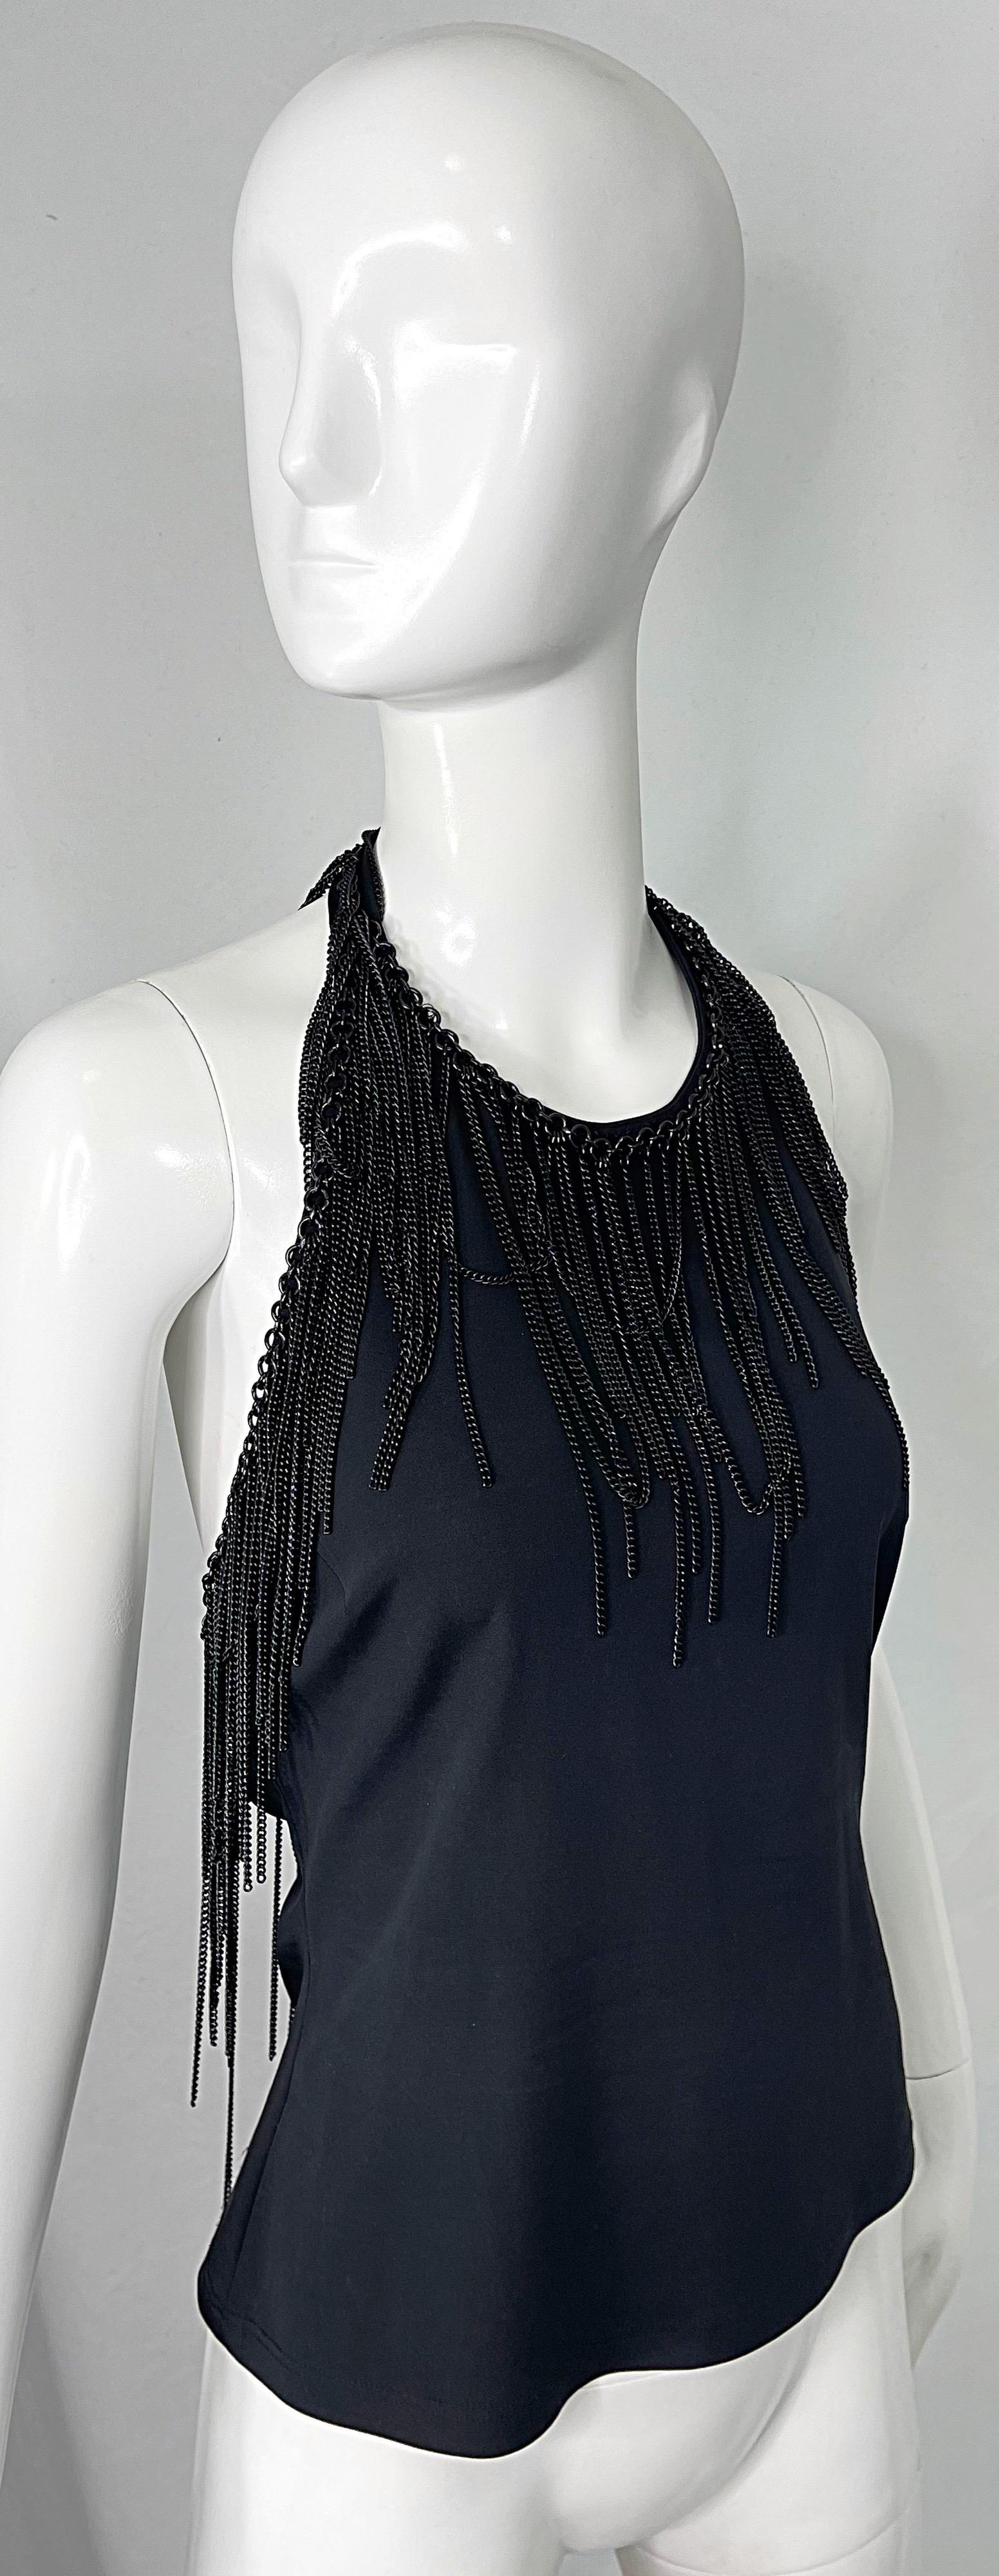 Gianni Versace 2000s Size 44 / 8 10 Black Chain Encrusted Y2K Halter Top Shirt  For Sale 7